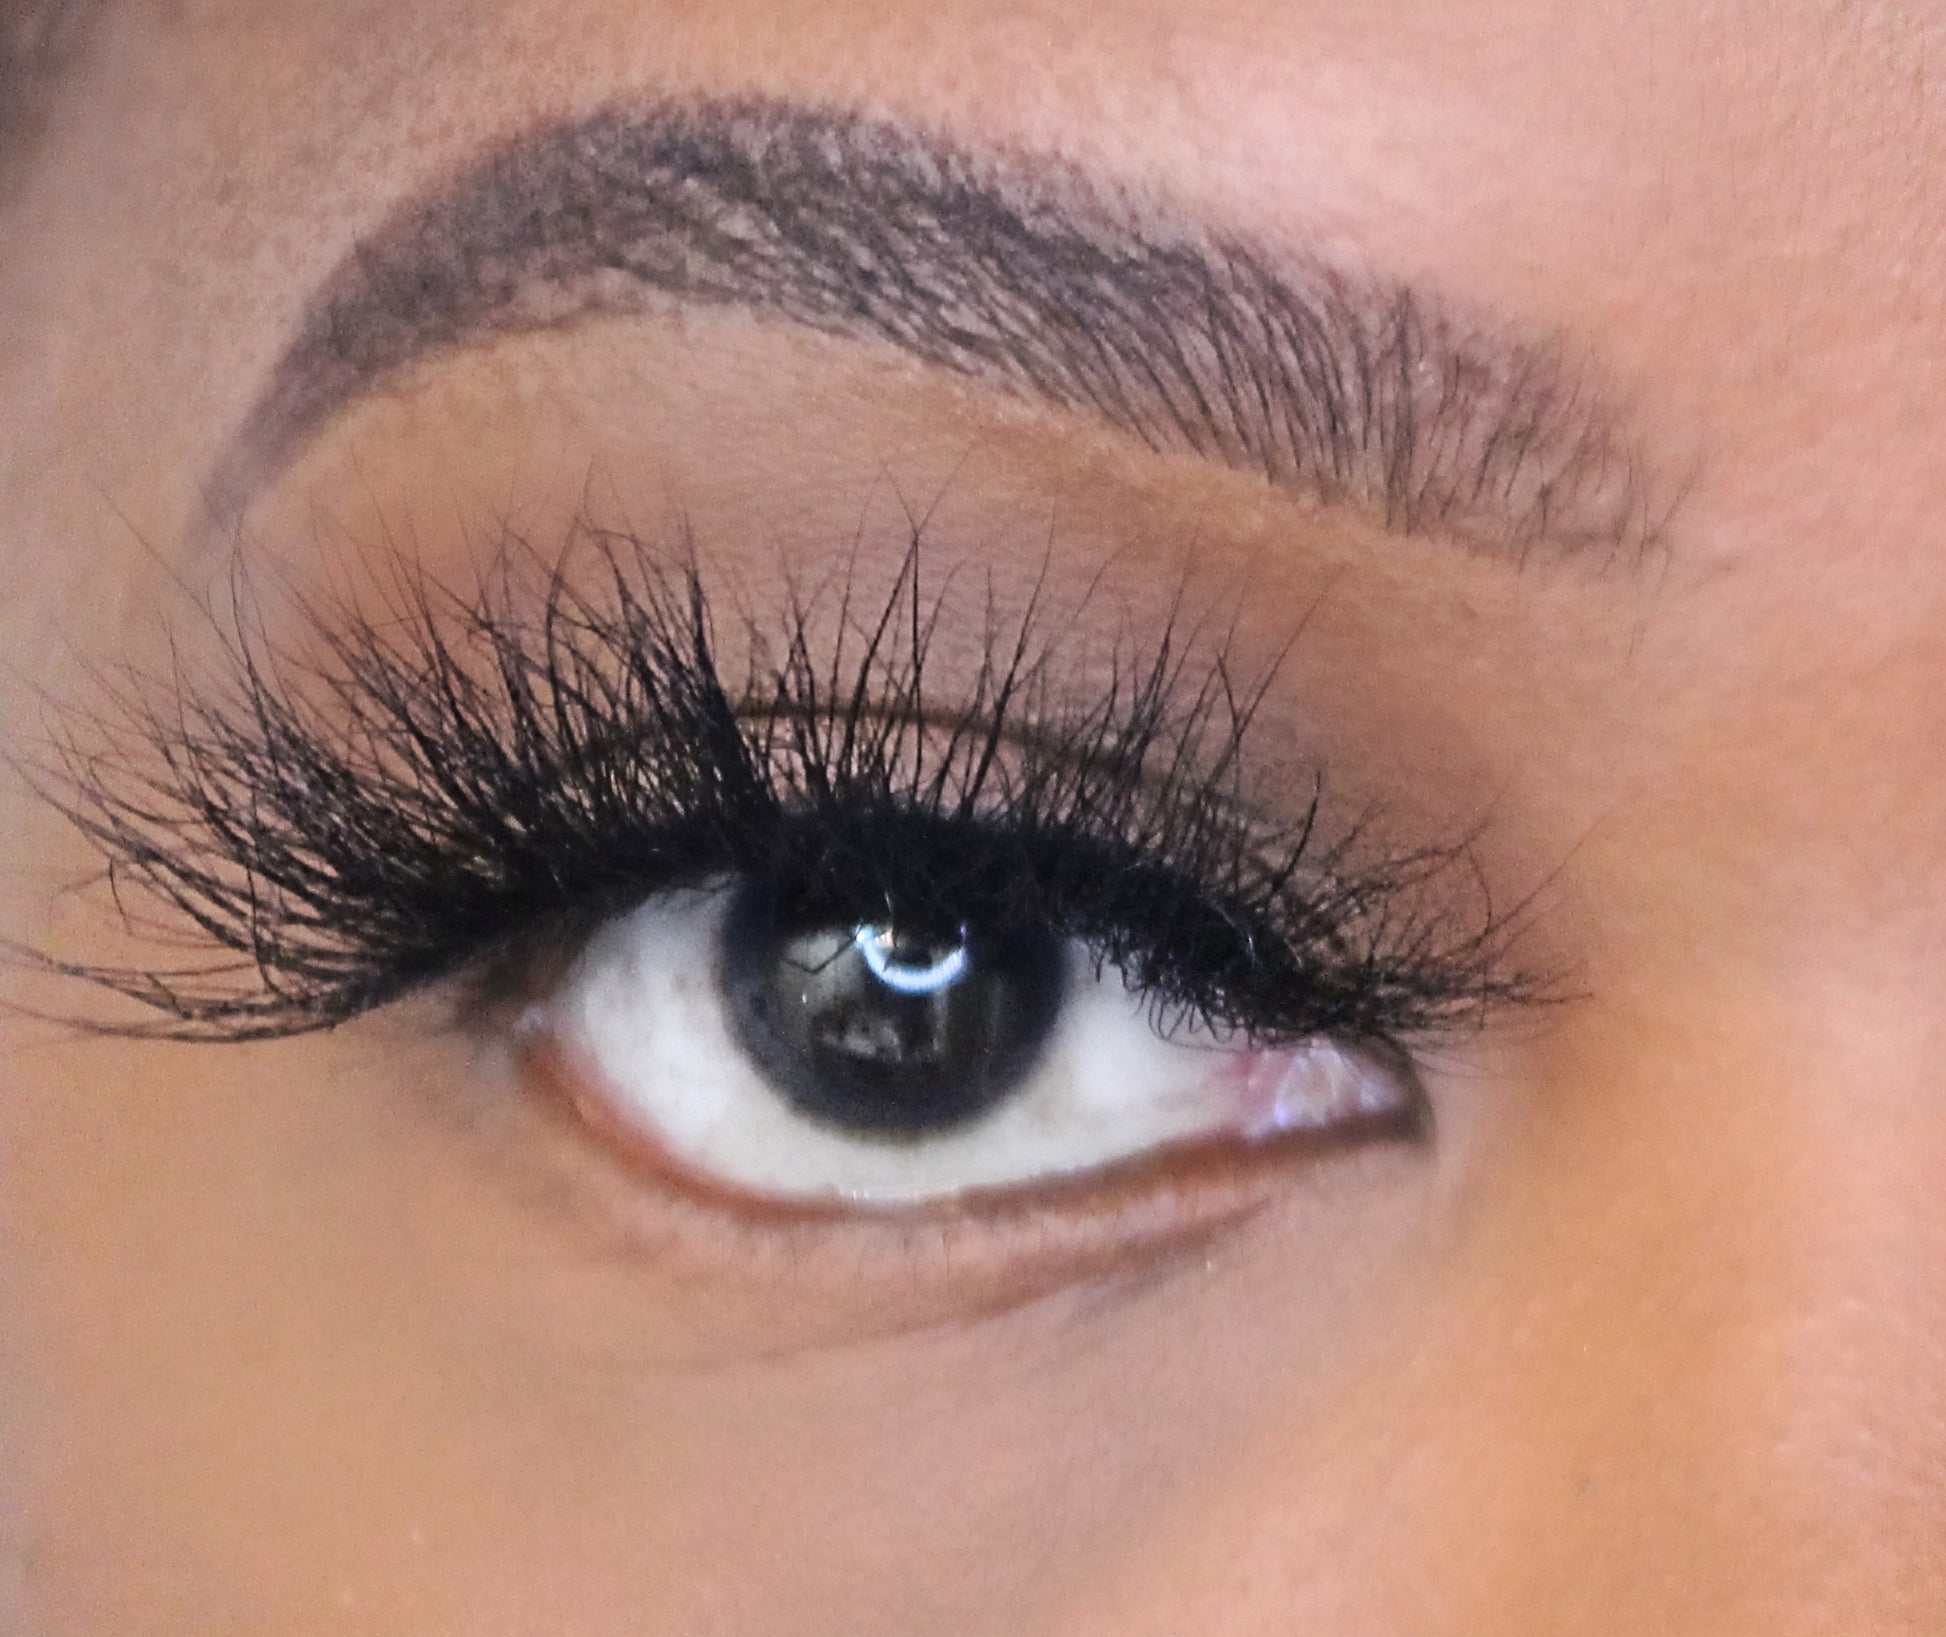 These 5D premium mink lashes are 25mm in length. They are wispy, lightweight, and comfortable to wear on the lids. The flexible cotton lash band, makes the application process a breeze. Baddie lashes are suitable for dramatic eye looks. They will definitely make your eyes pop, but are not for timid lash wearers. You can wear this reusable style up to 25 times if handled with care. Lashes come with a cute bag, and a mascara wand so that you can take care of these beauties.